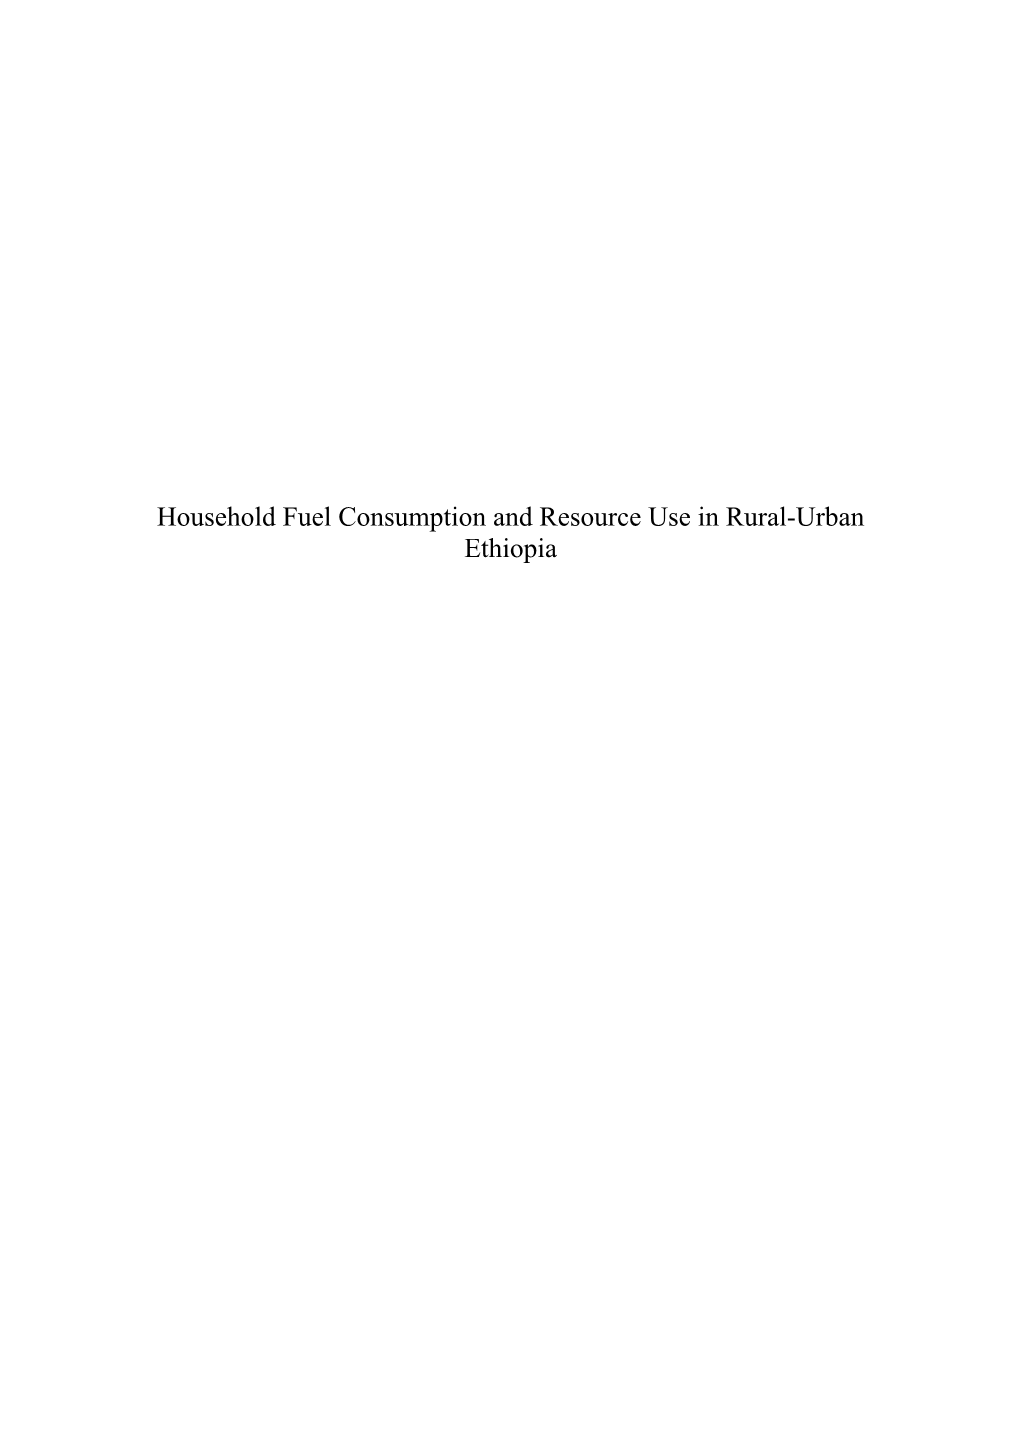 Household Fuel Consumption and Resource Use in Rural-Urban Ethiopia